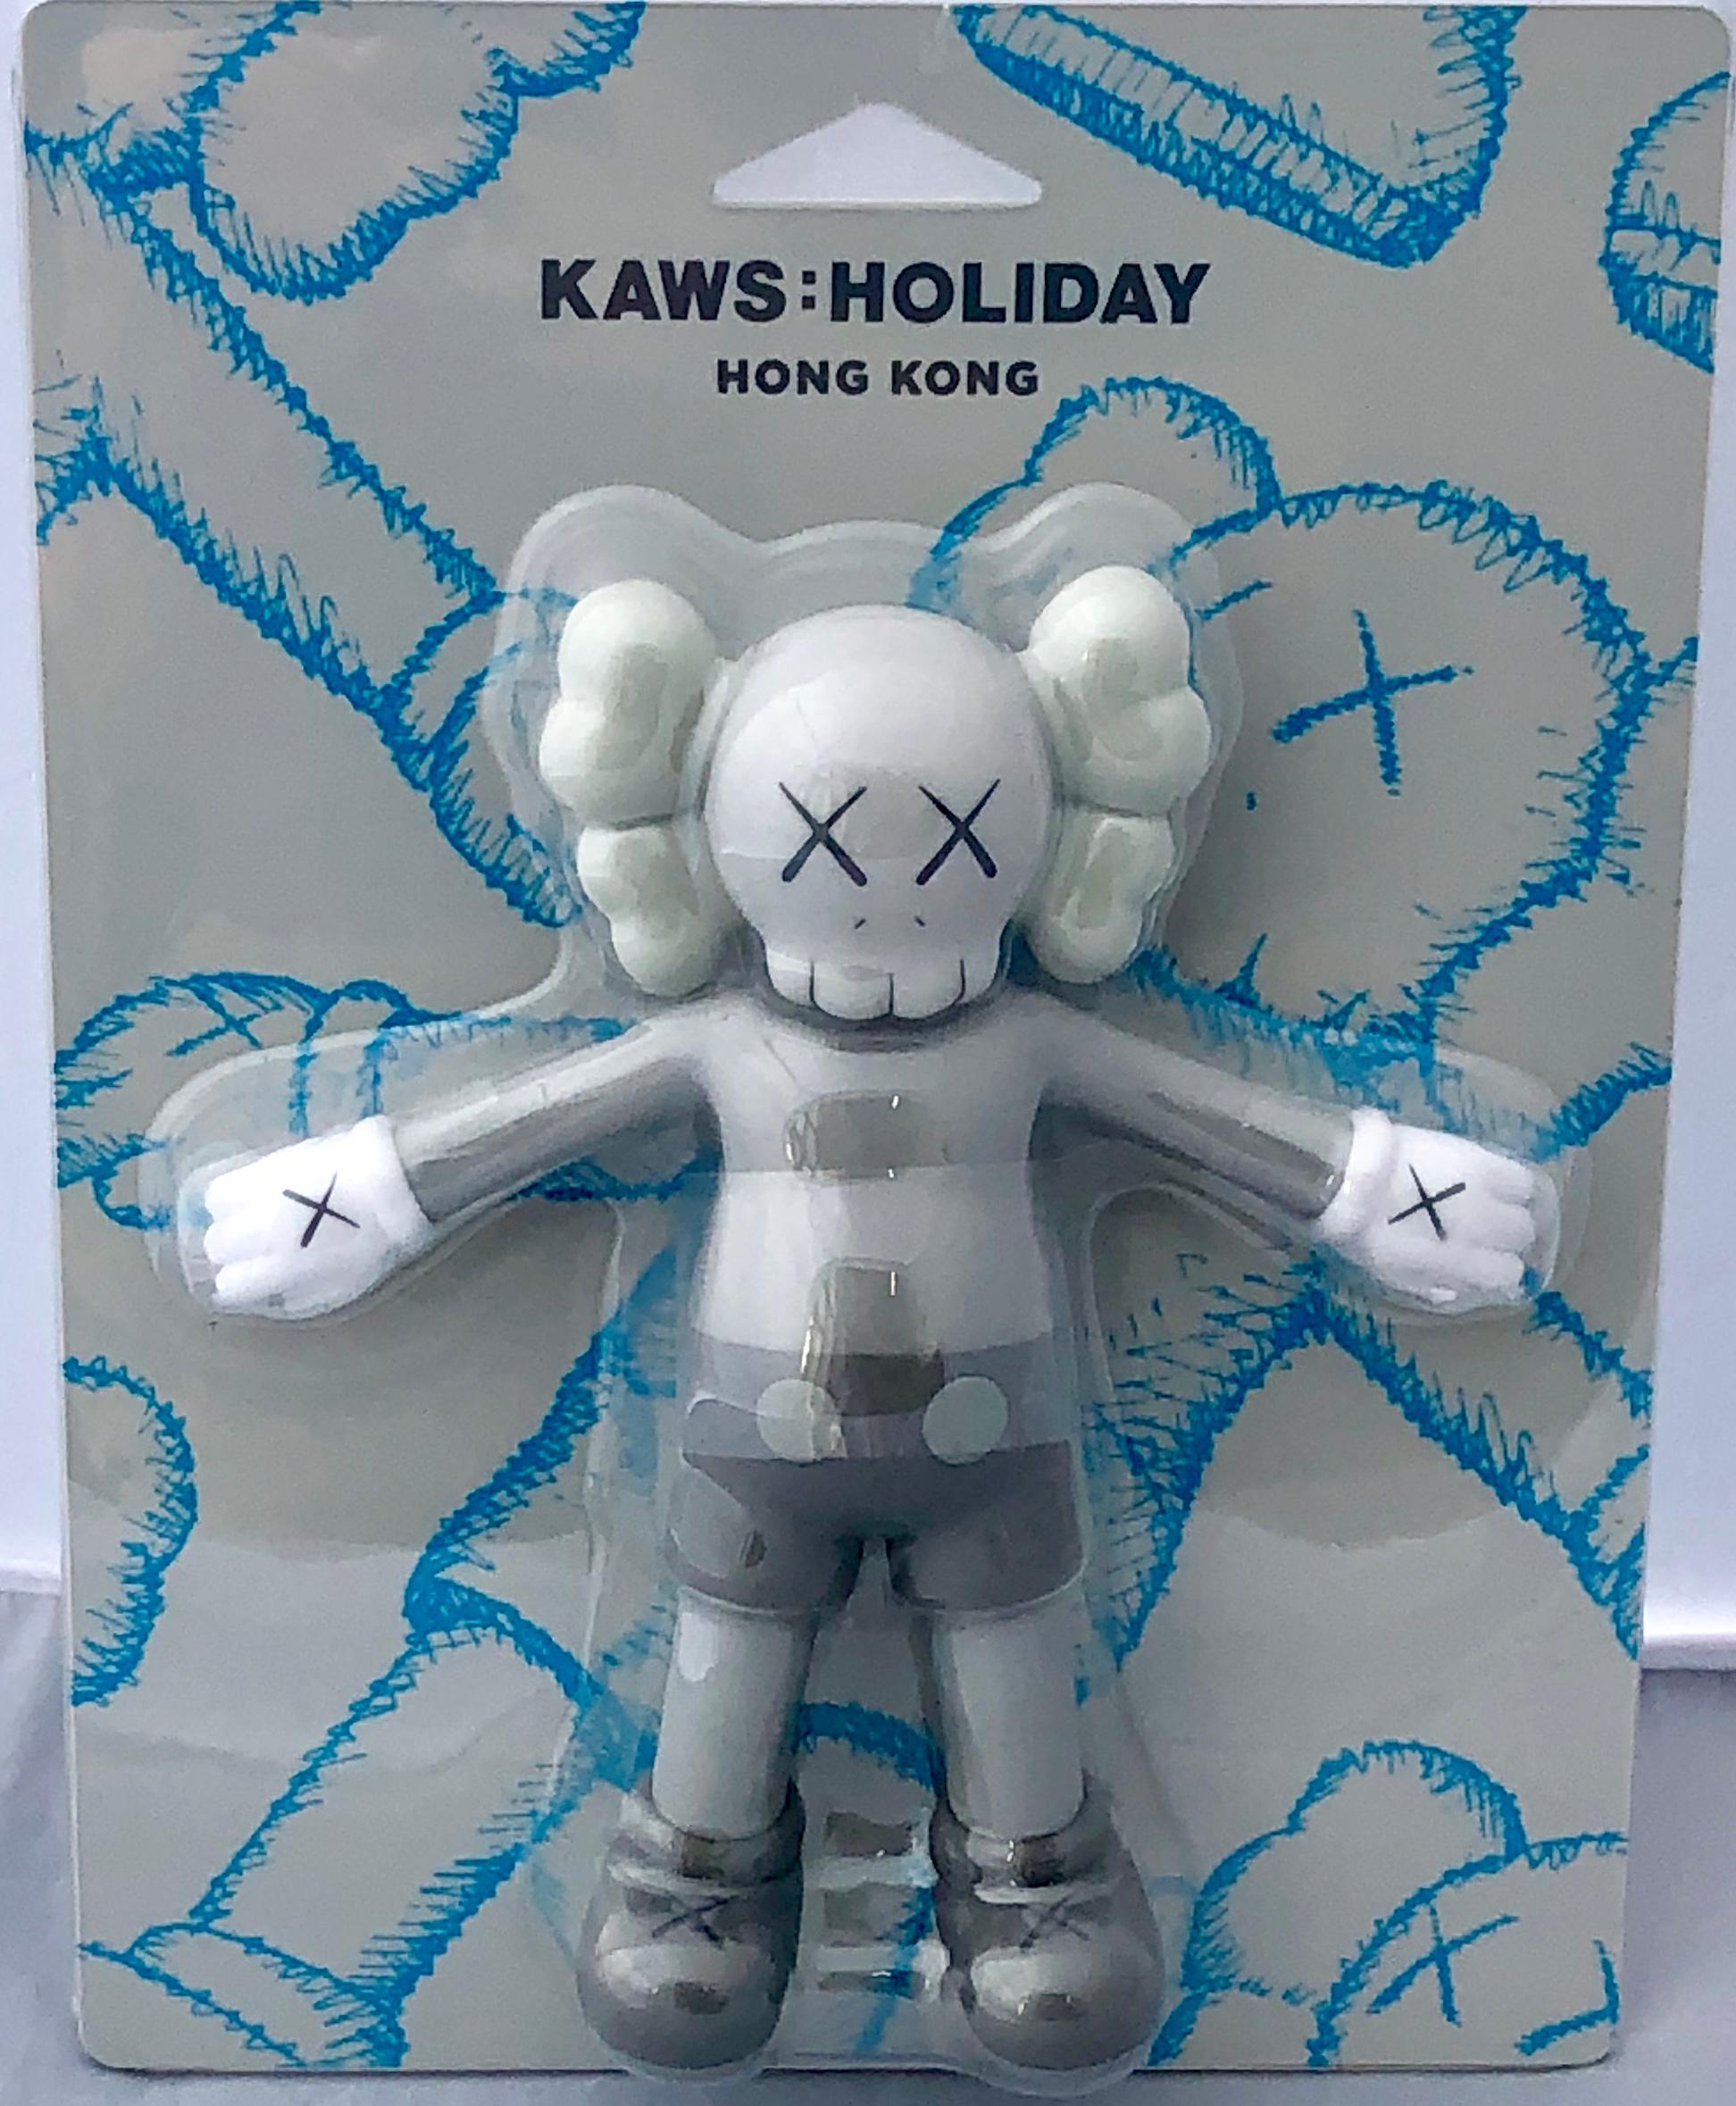 KAWS Hon Kong 'Holiday' Companion 2019:
This figurine was published by All Rights Reserved to commemorate the debut of a large scale KAWS floating figure in Hong Kong's Victoria Harbour in 2019. New in its original packaging. 

Medium: Vinyl art